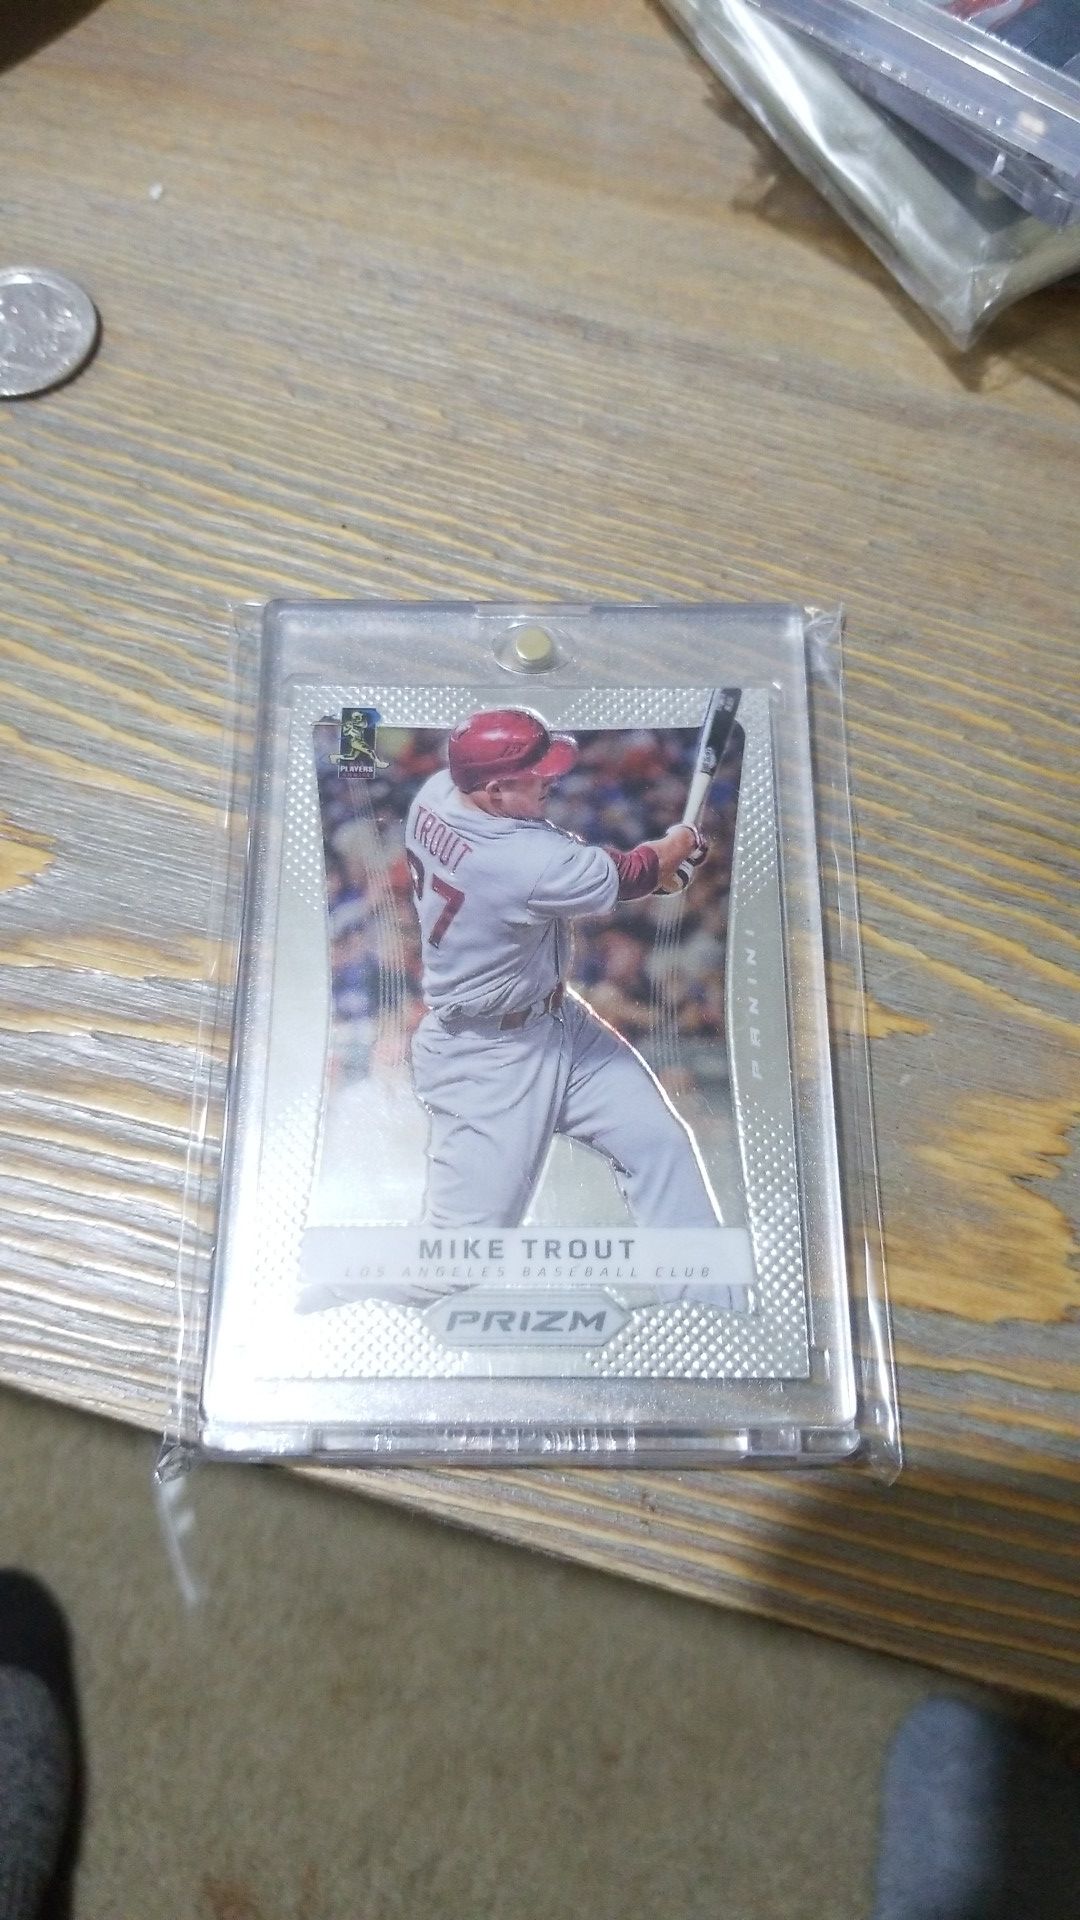 Baseball card- 2012 prizm mike trout rc